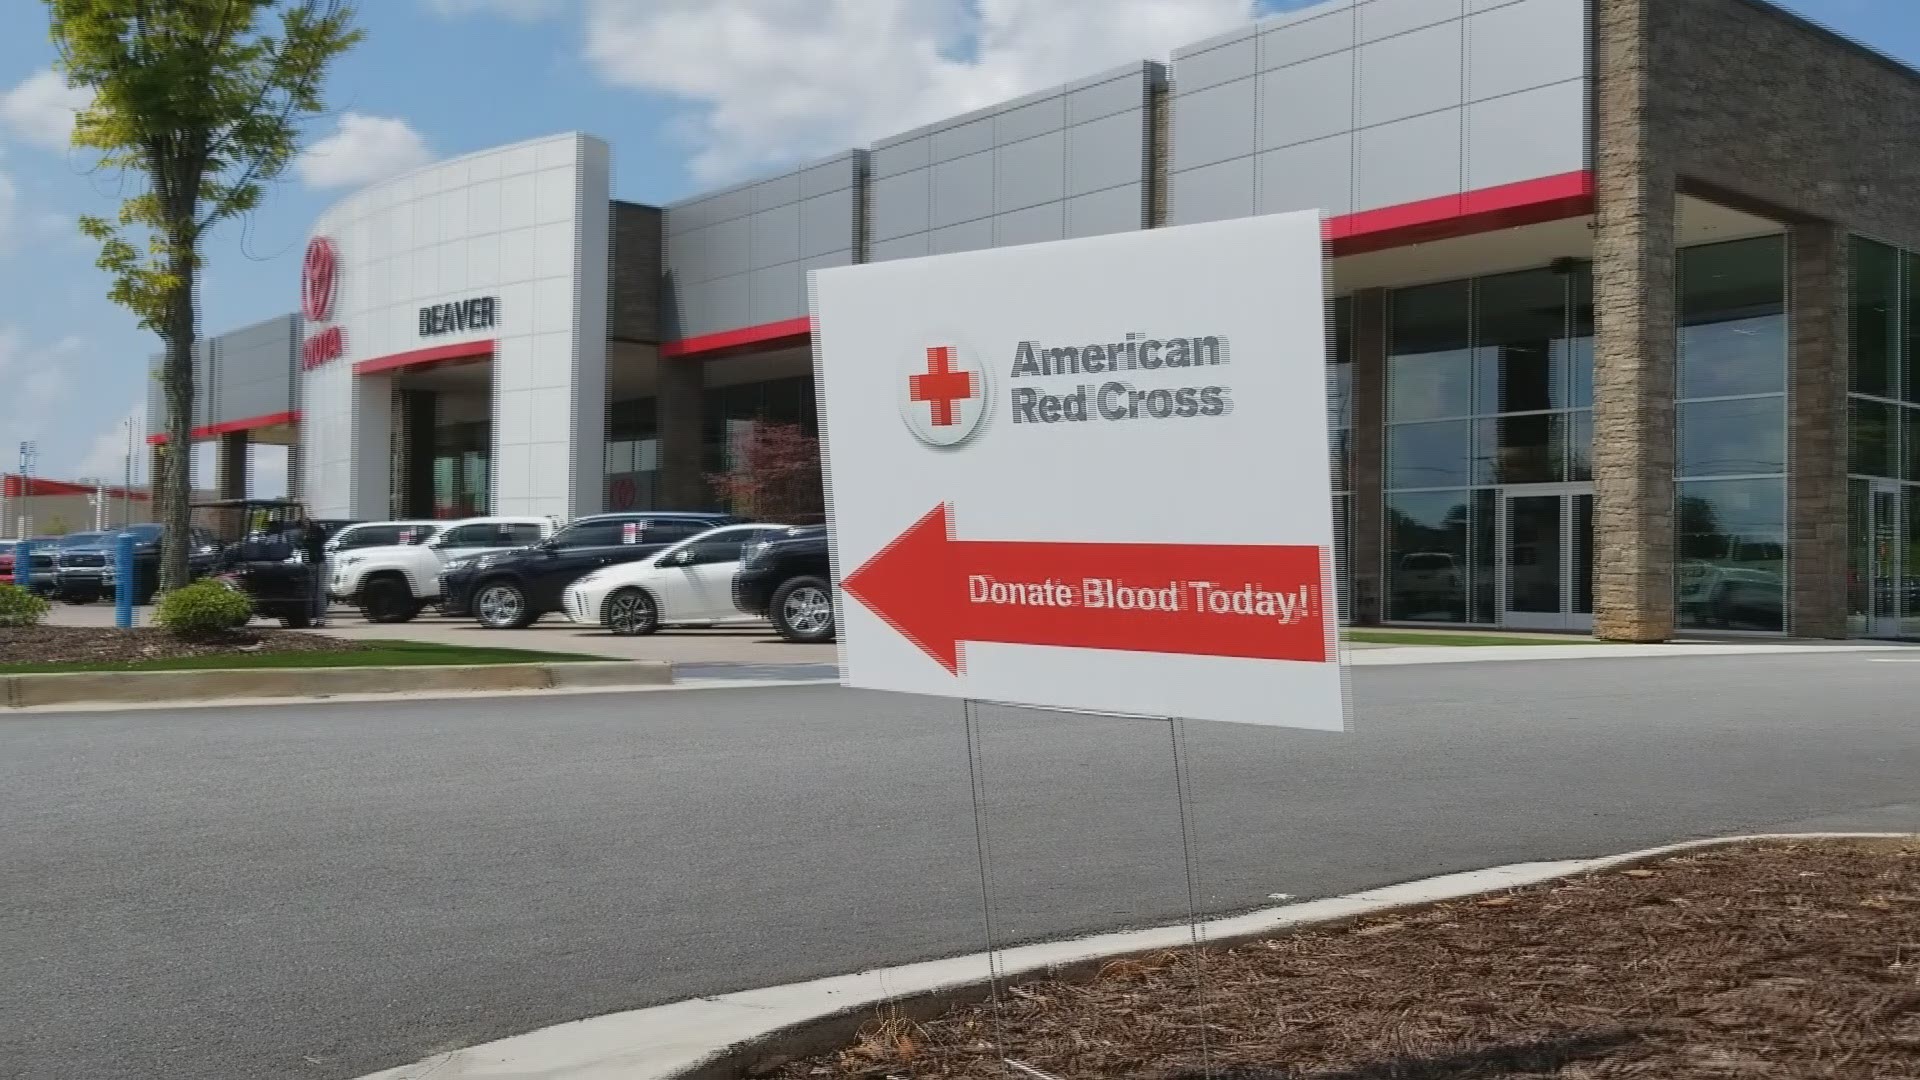 Seeing a need and wanting to help the community, Beaver Toyota in Cumming, Georgia hosts a quarterly blood drive.